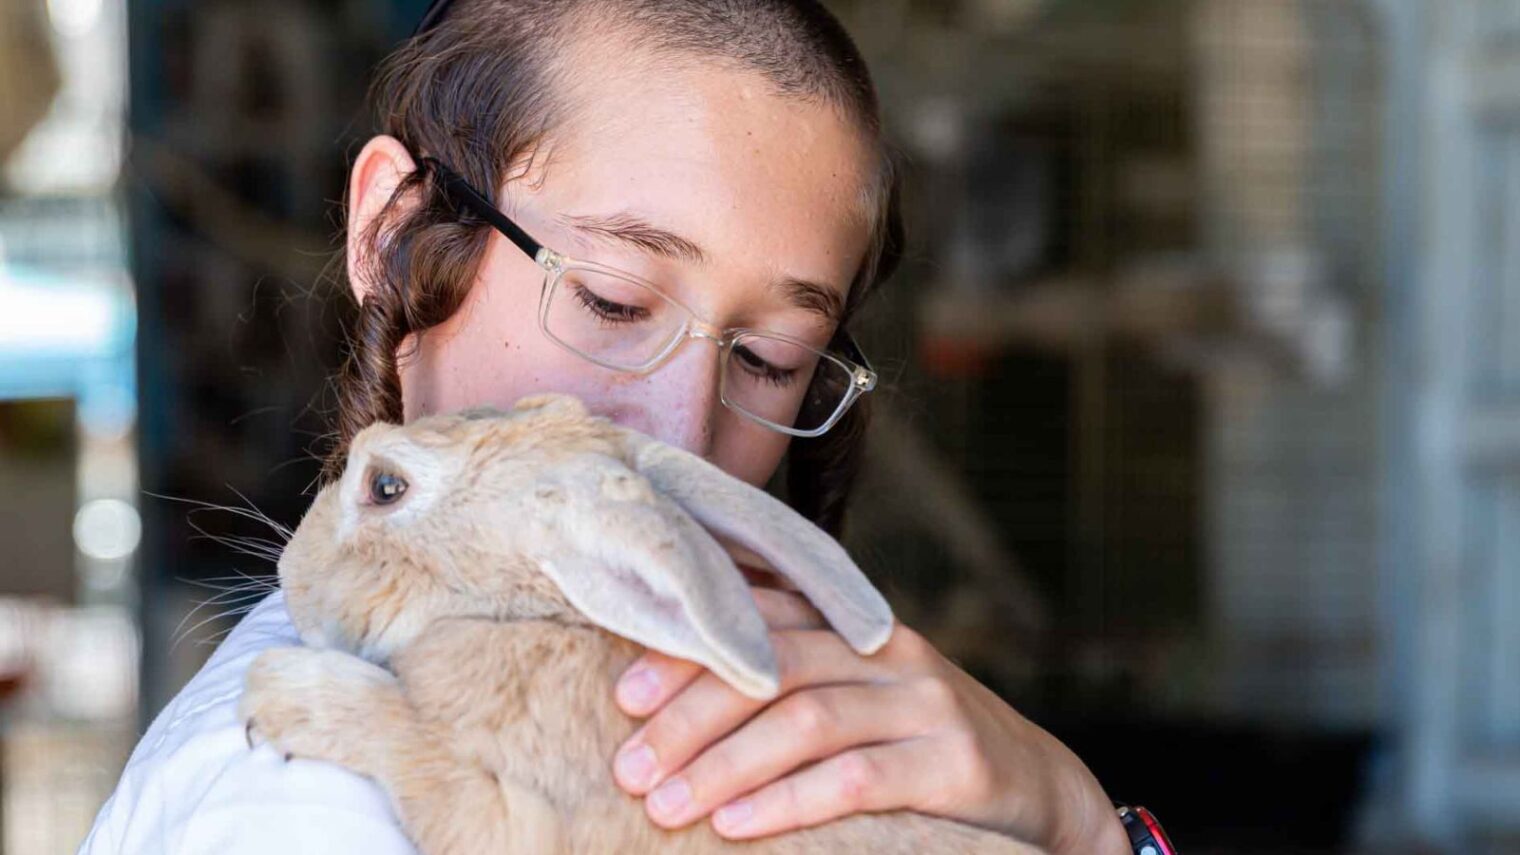 A boy cuddles a rabbit at the Ohel Dov yeshiva’s one-of-a-kind petting zoo. Photo by Osnat Edri